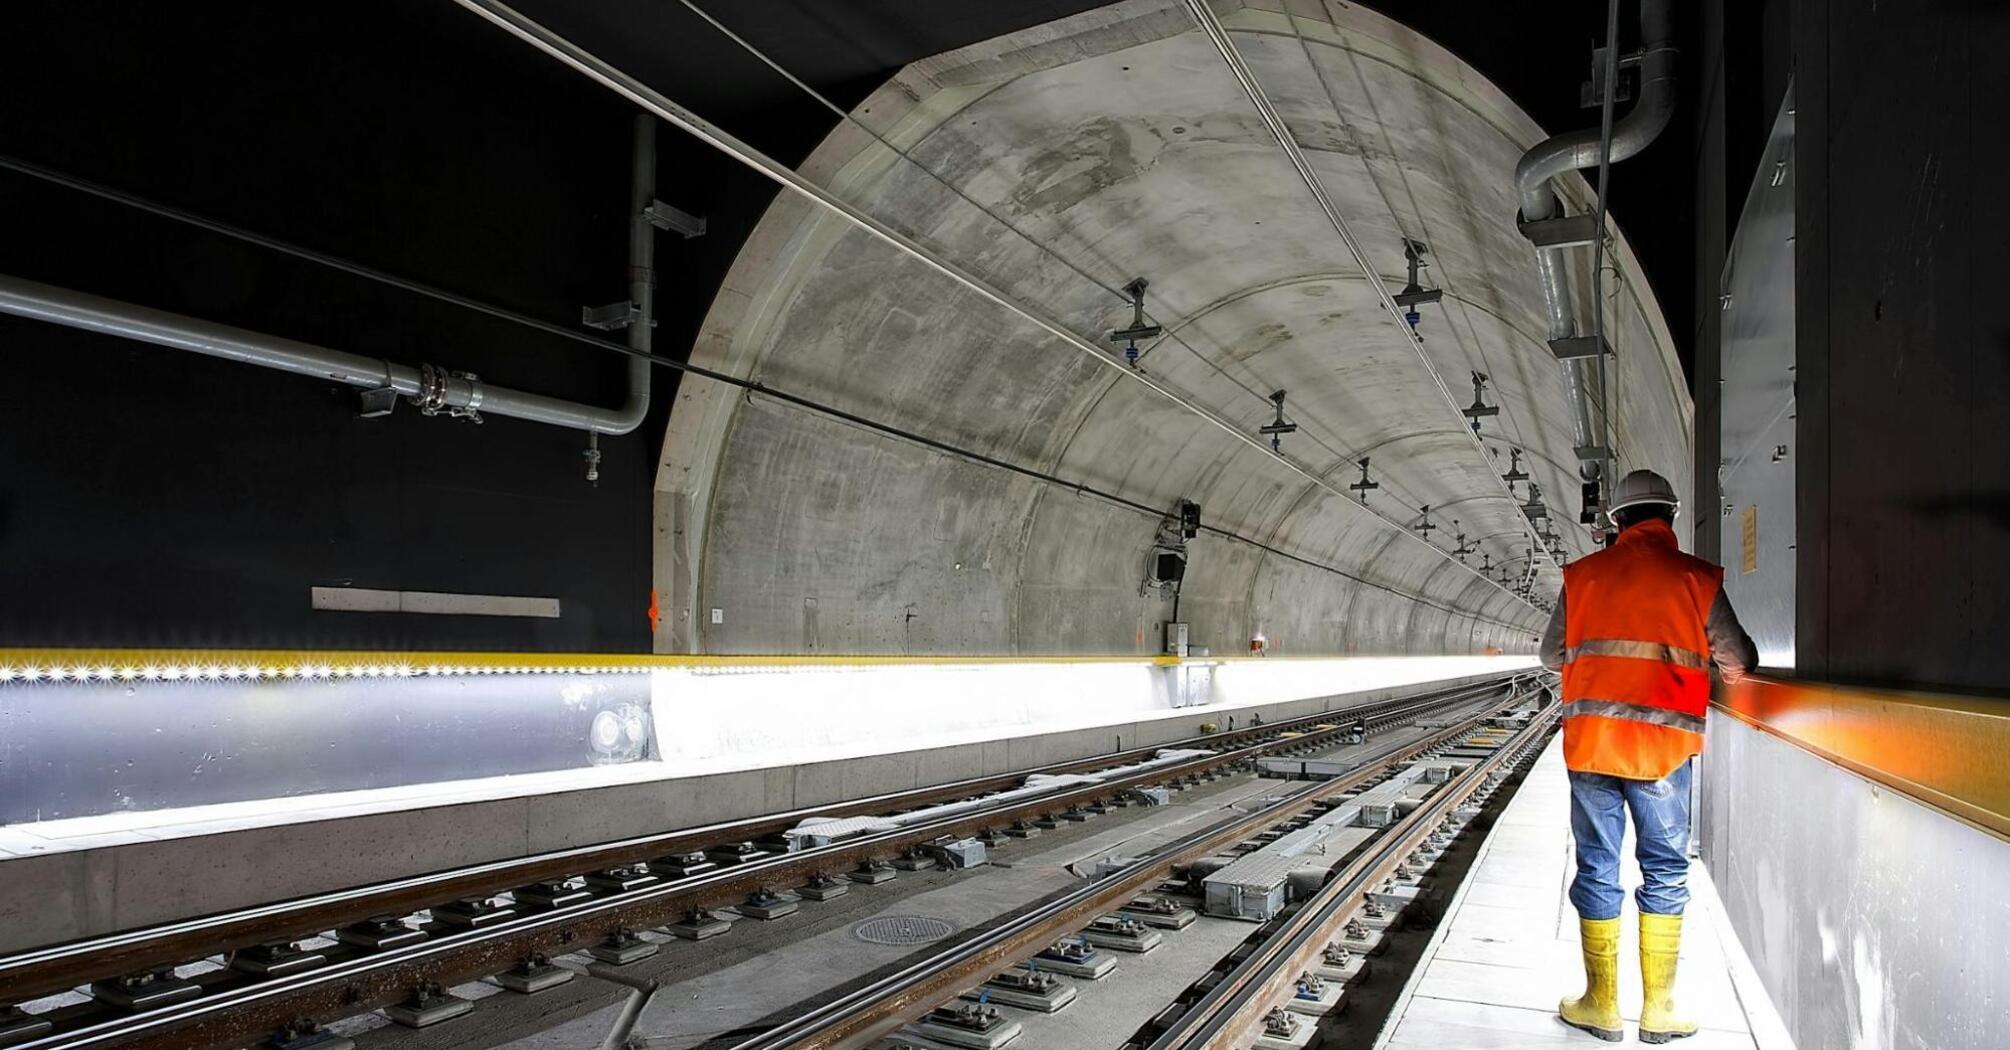 Construction worker inspecting the interior of an underground train tunnel